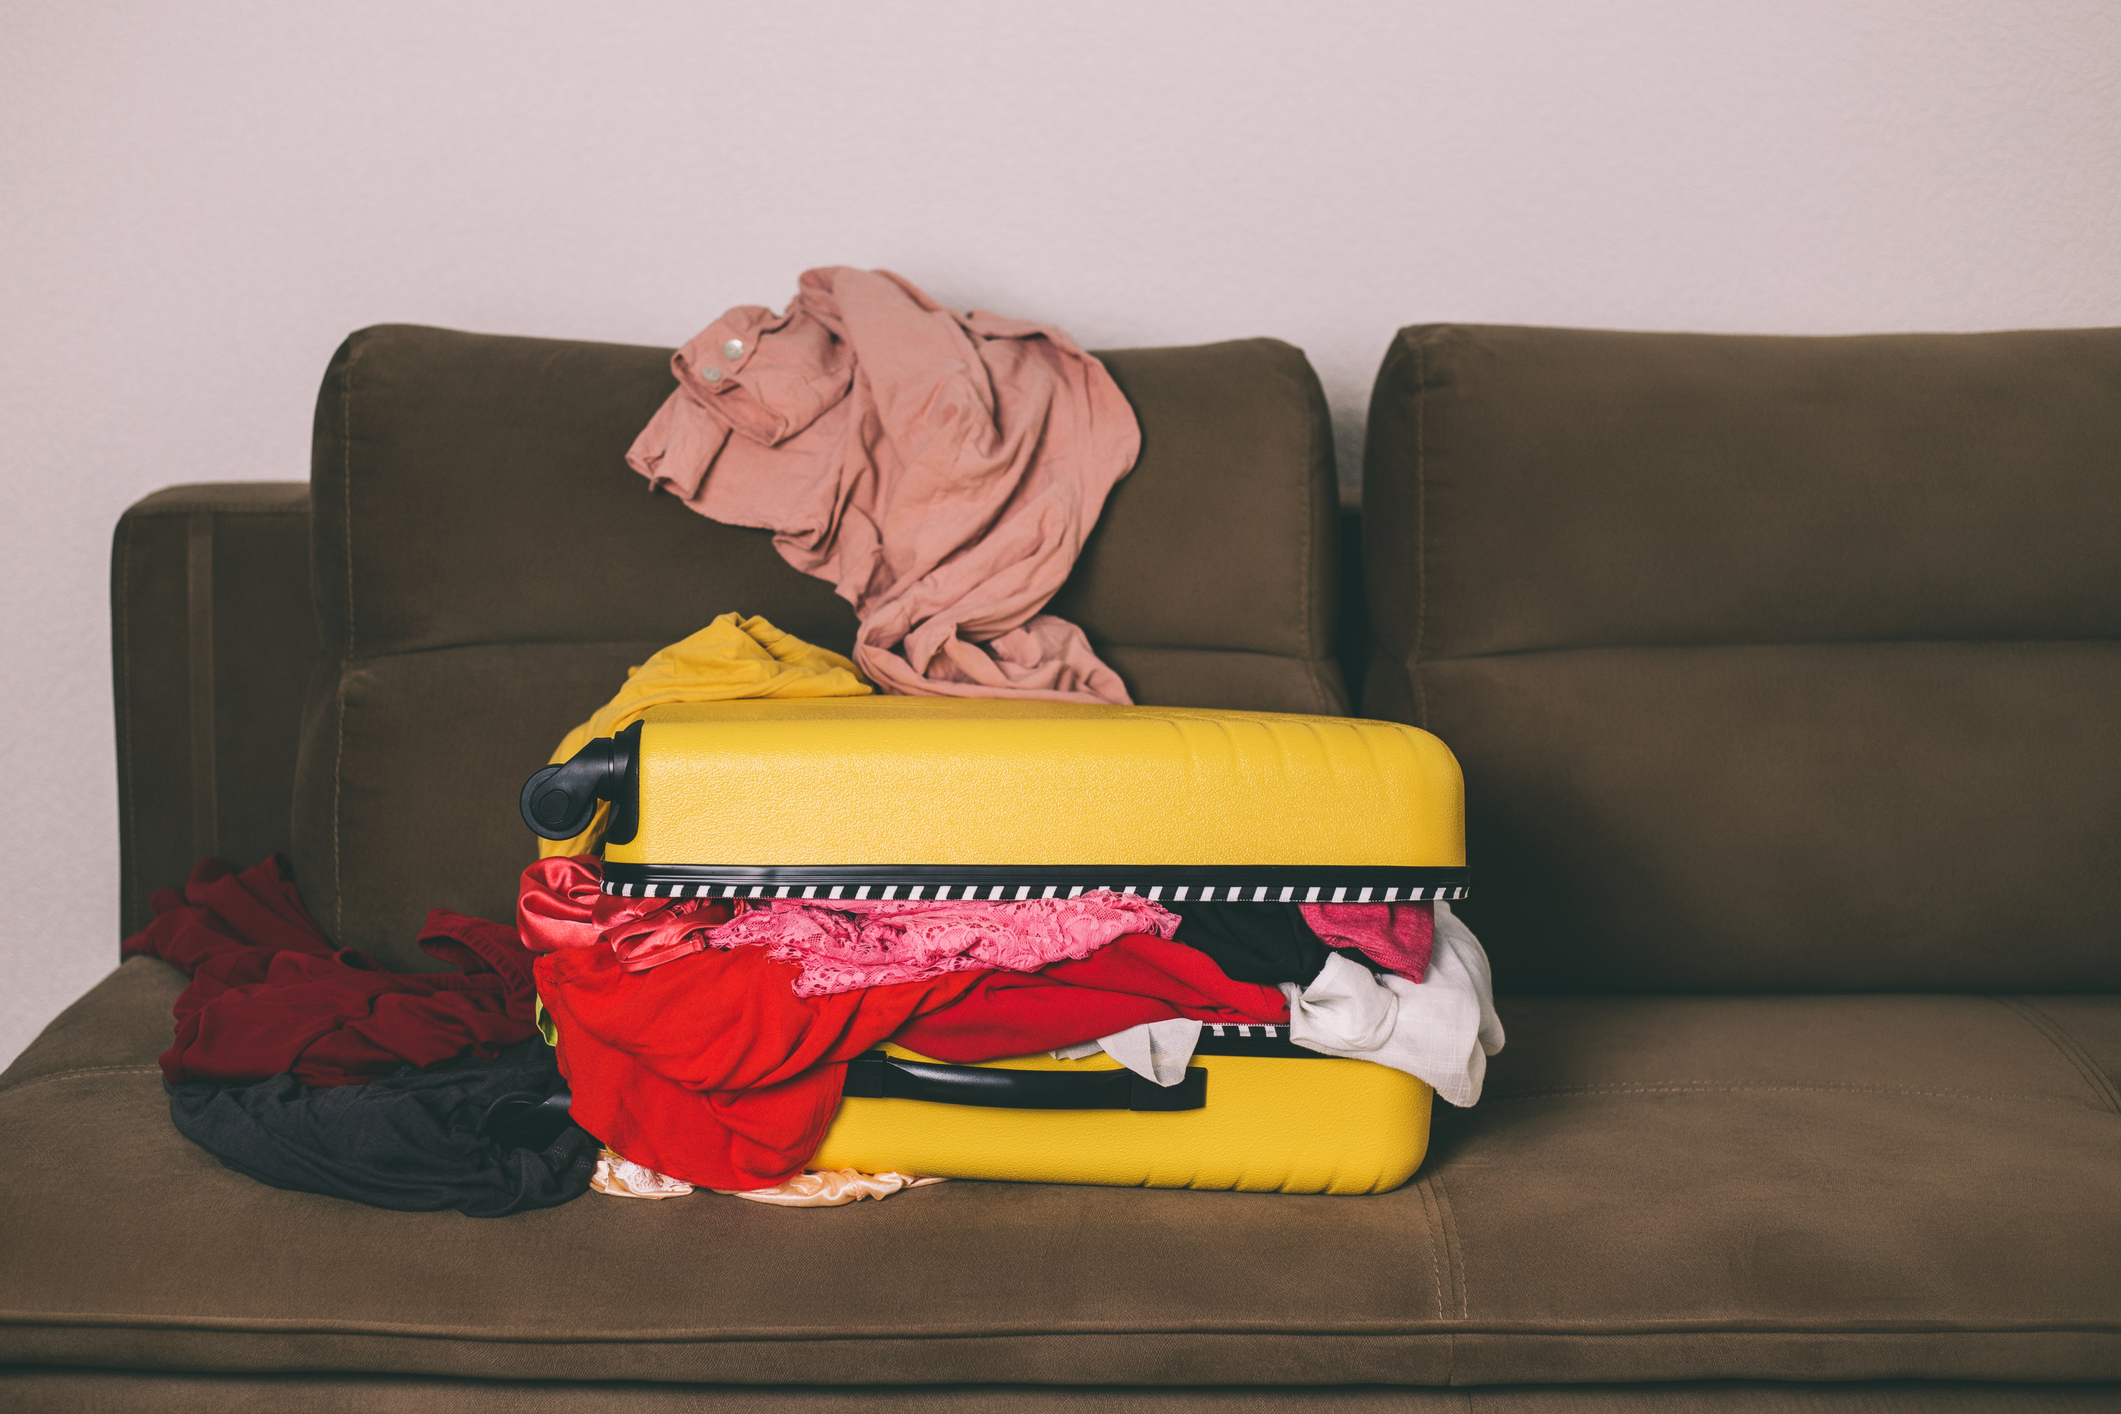 Overpacked yellow suitcase with clothes on a sofa, suggesting travel preparation challenges